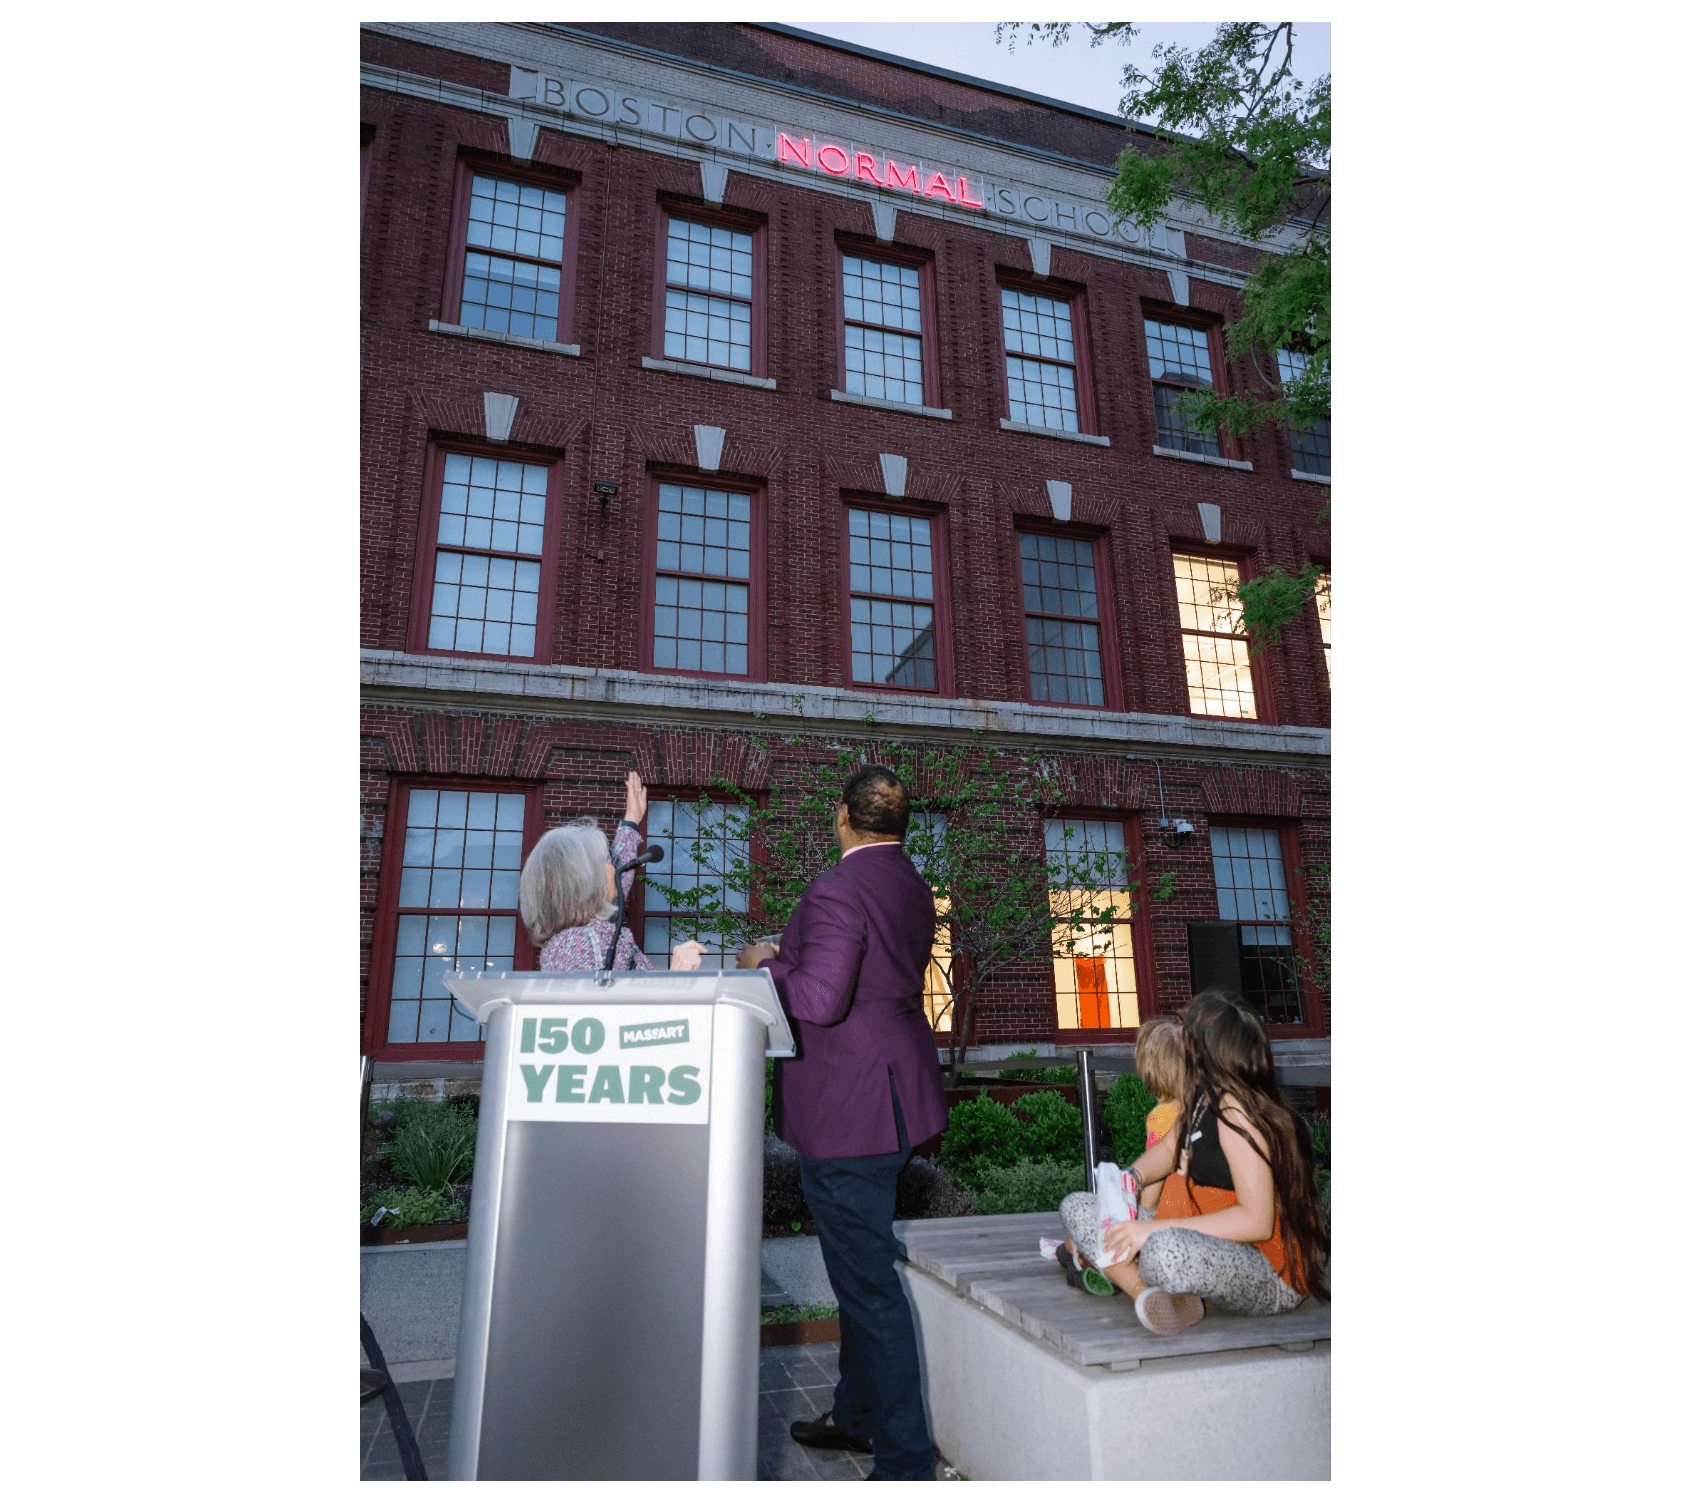 MassArt President Mary K. Grant and artist Steve Locke stand in front of a building with the sign "Boston Normal School."